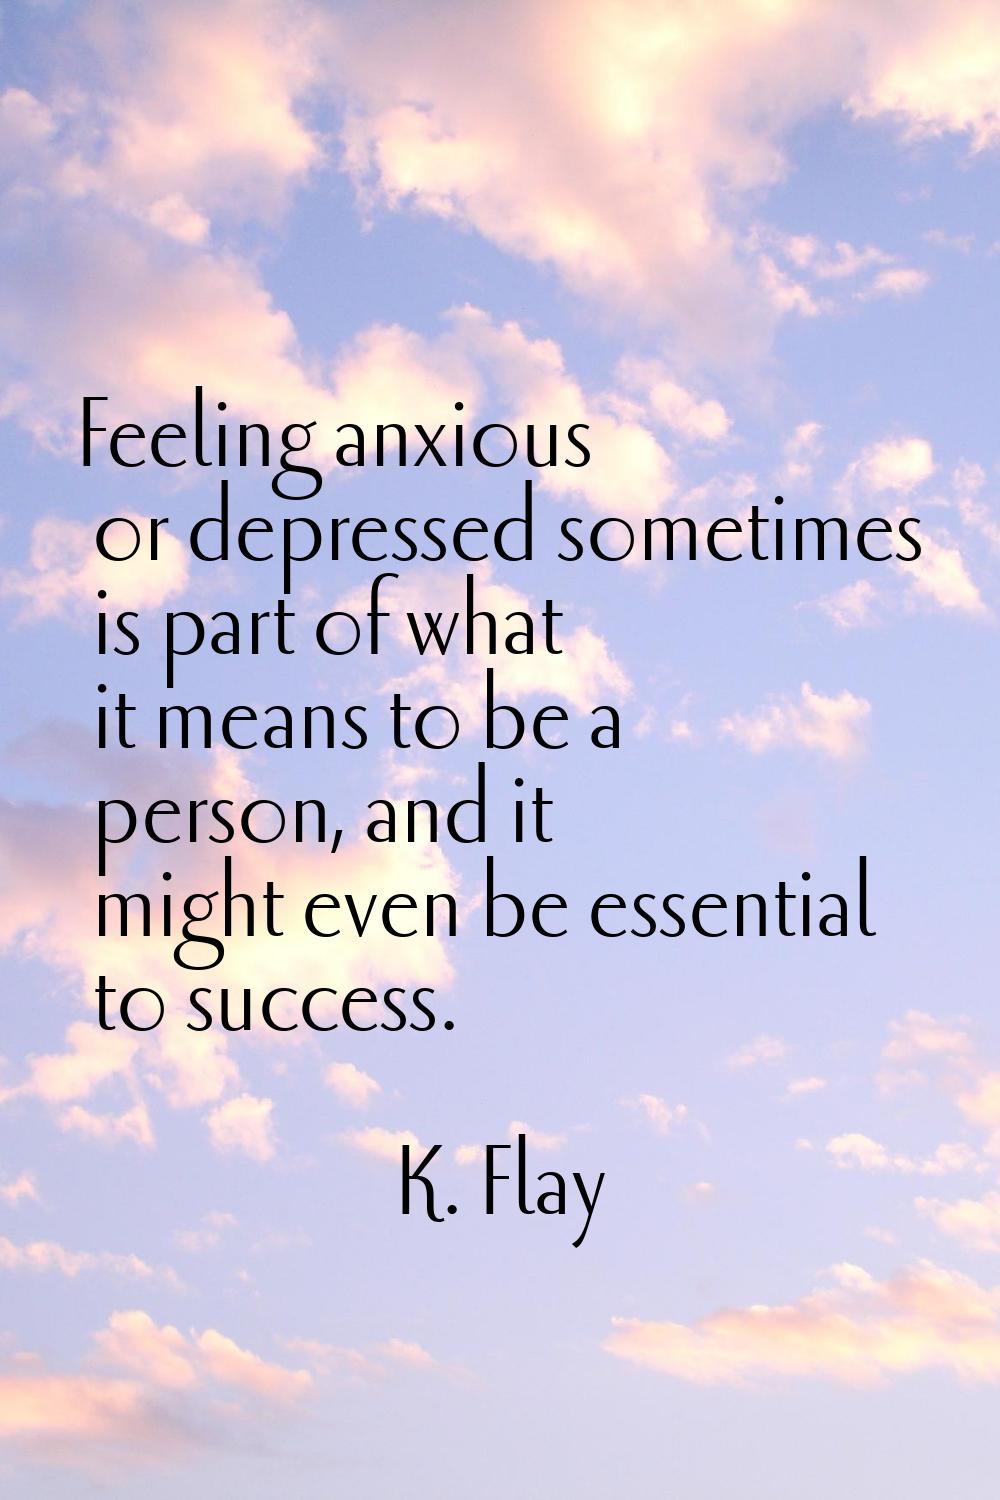 Feeling anxious or depressed sometimes is part of what it means to be a person, and it might even b